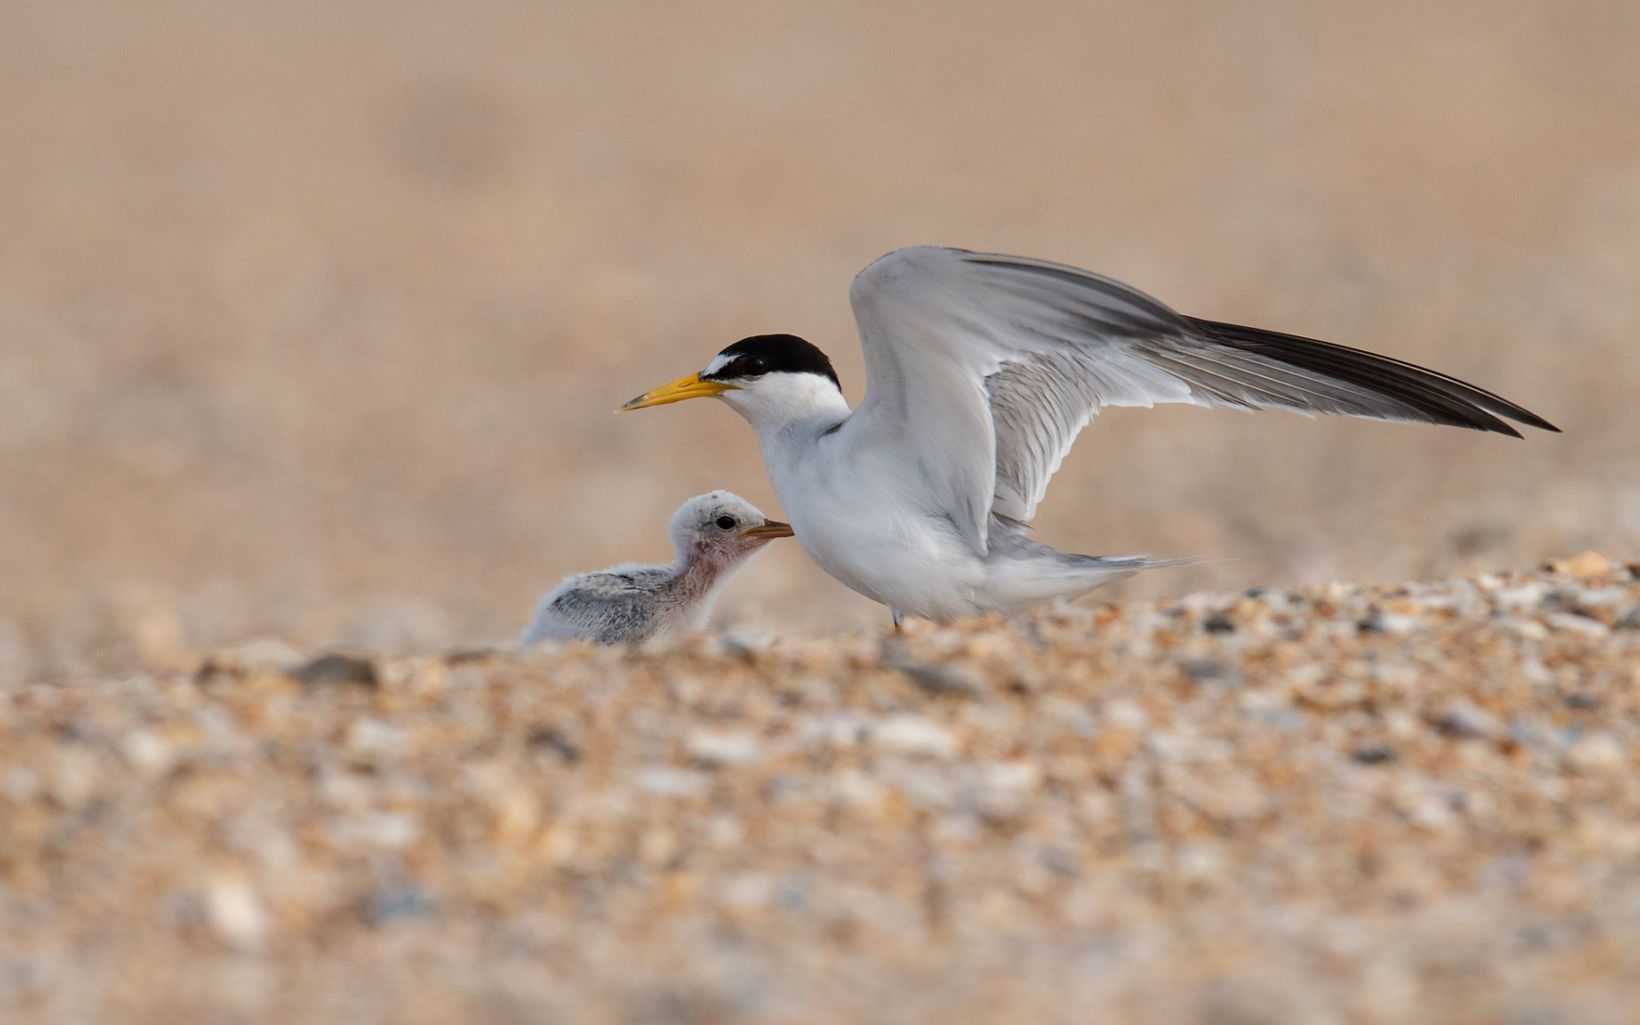 An adult least tern is standing on the beach with its chick.